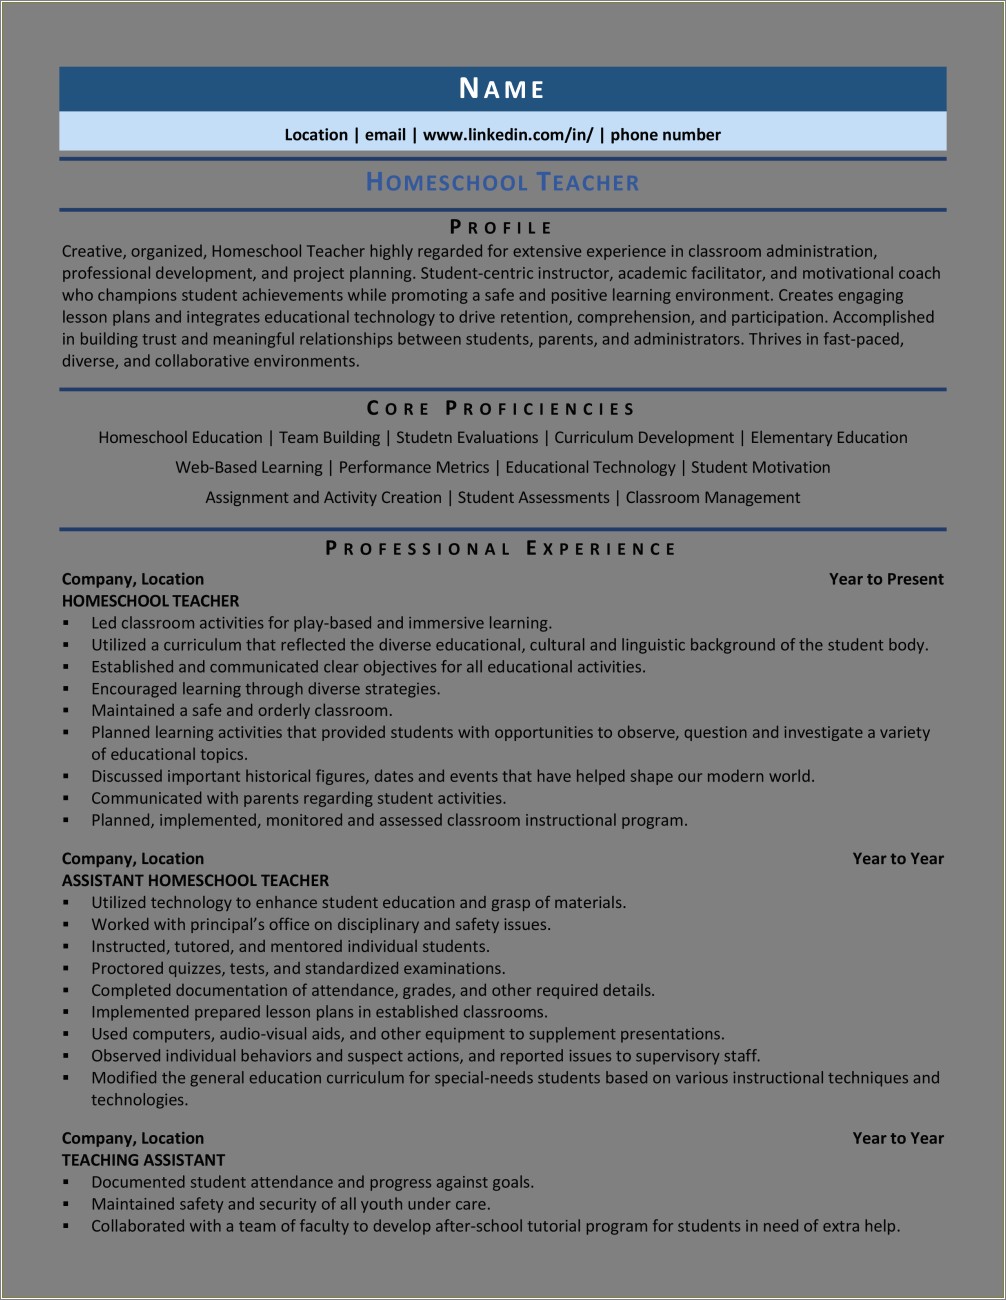 Home School For Your Job Resume